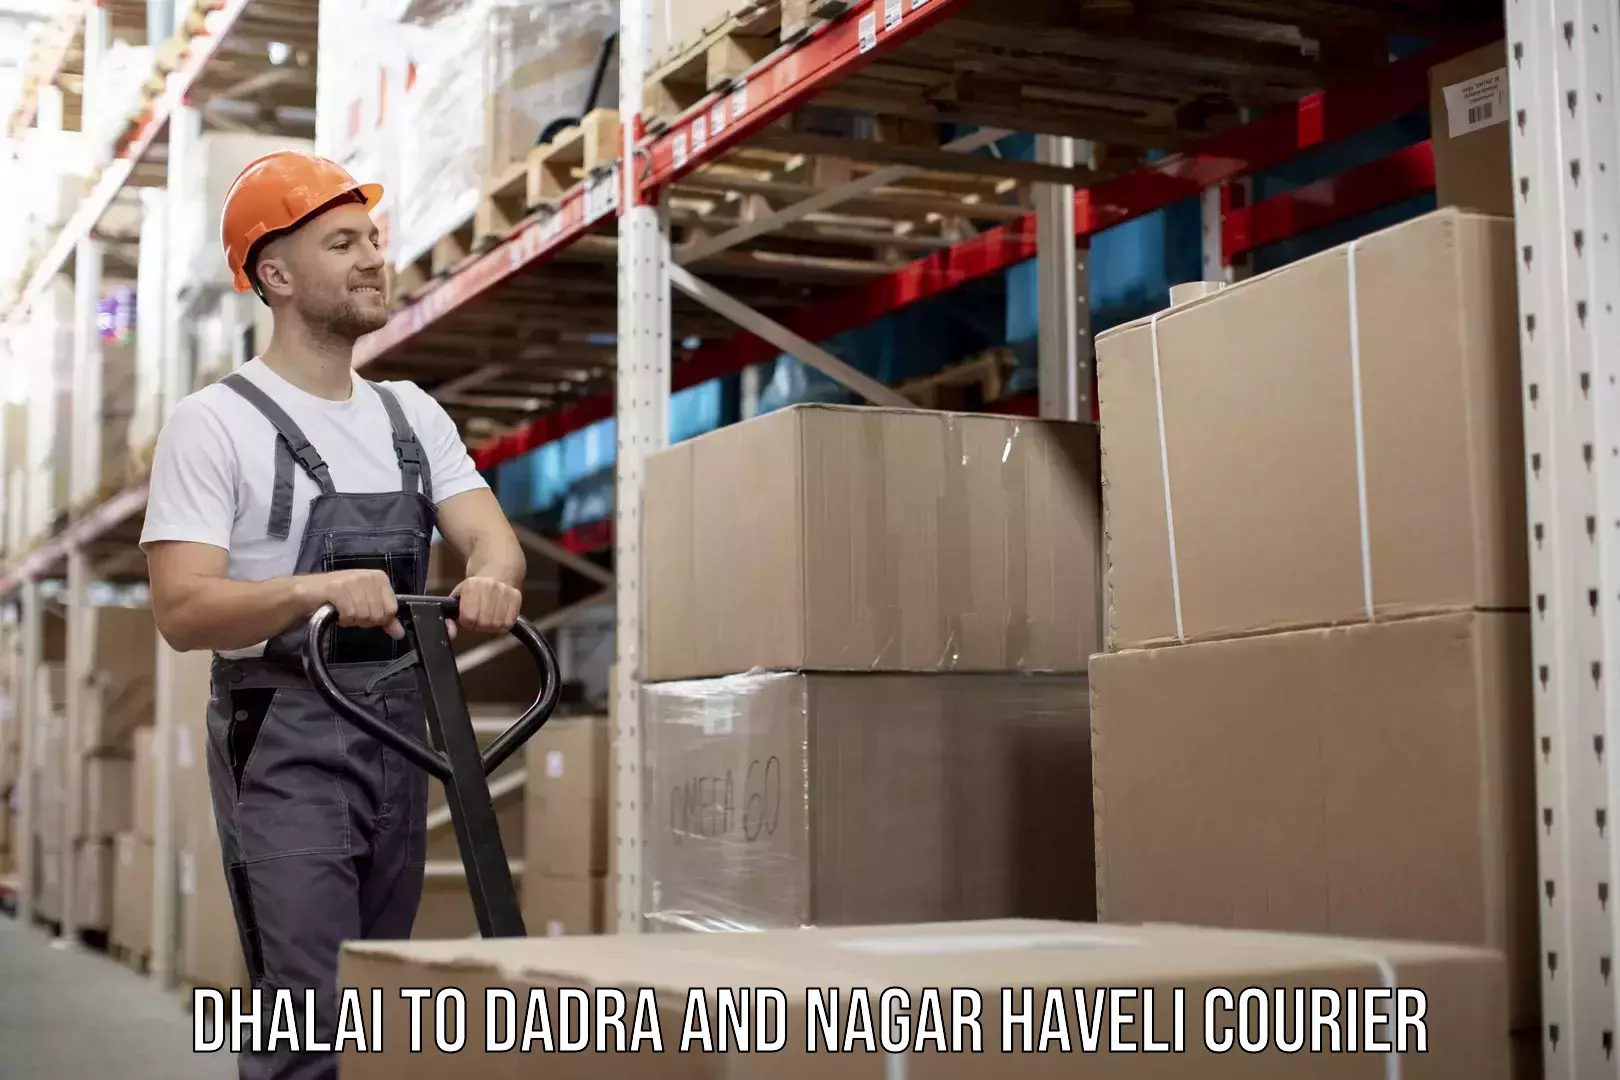 Rural area delivery Dhalai to Dadra and Nagar Haveli